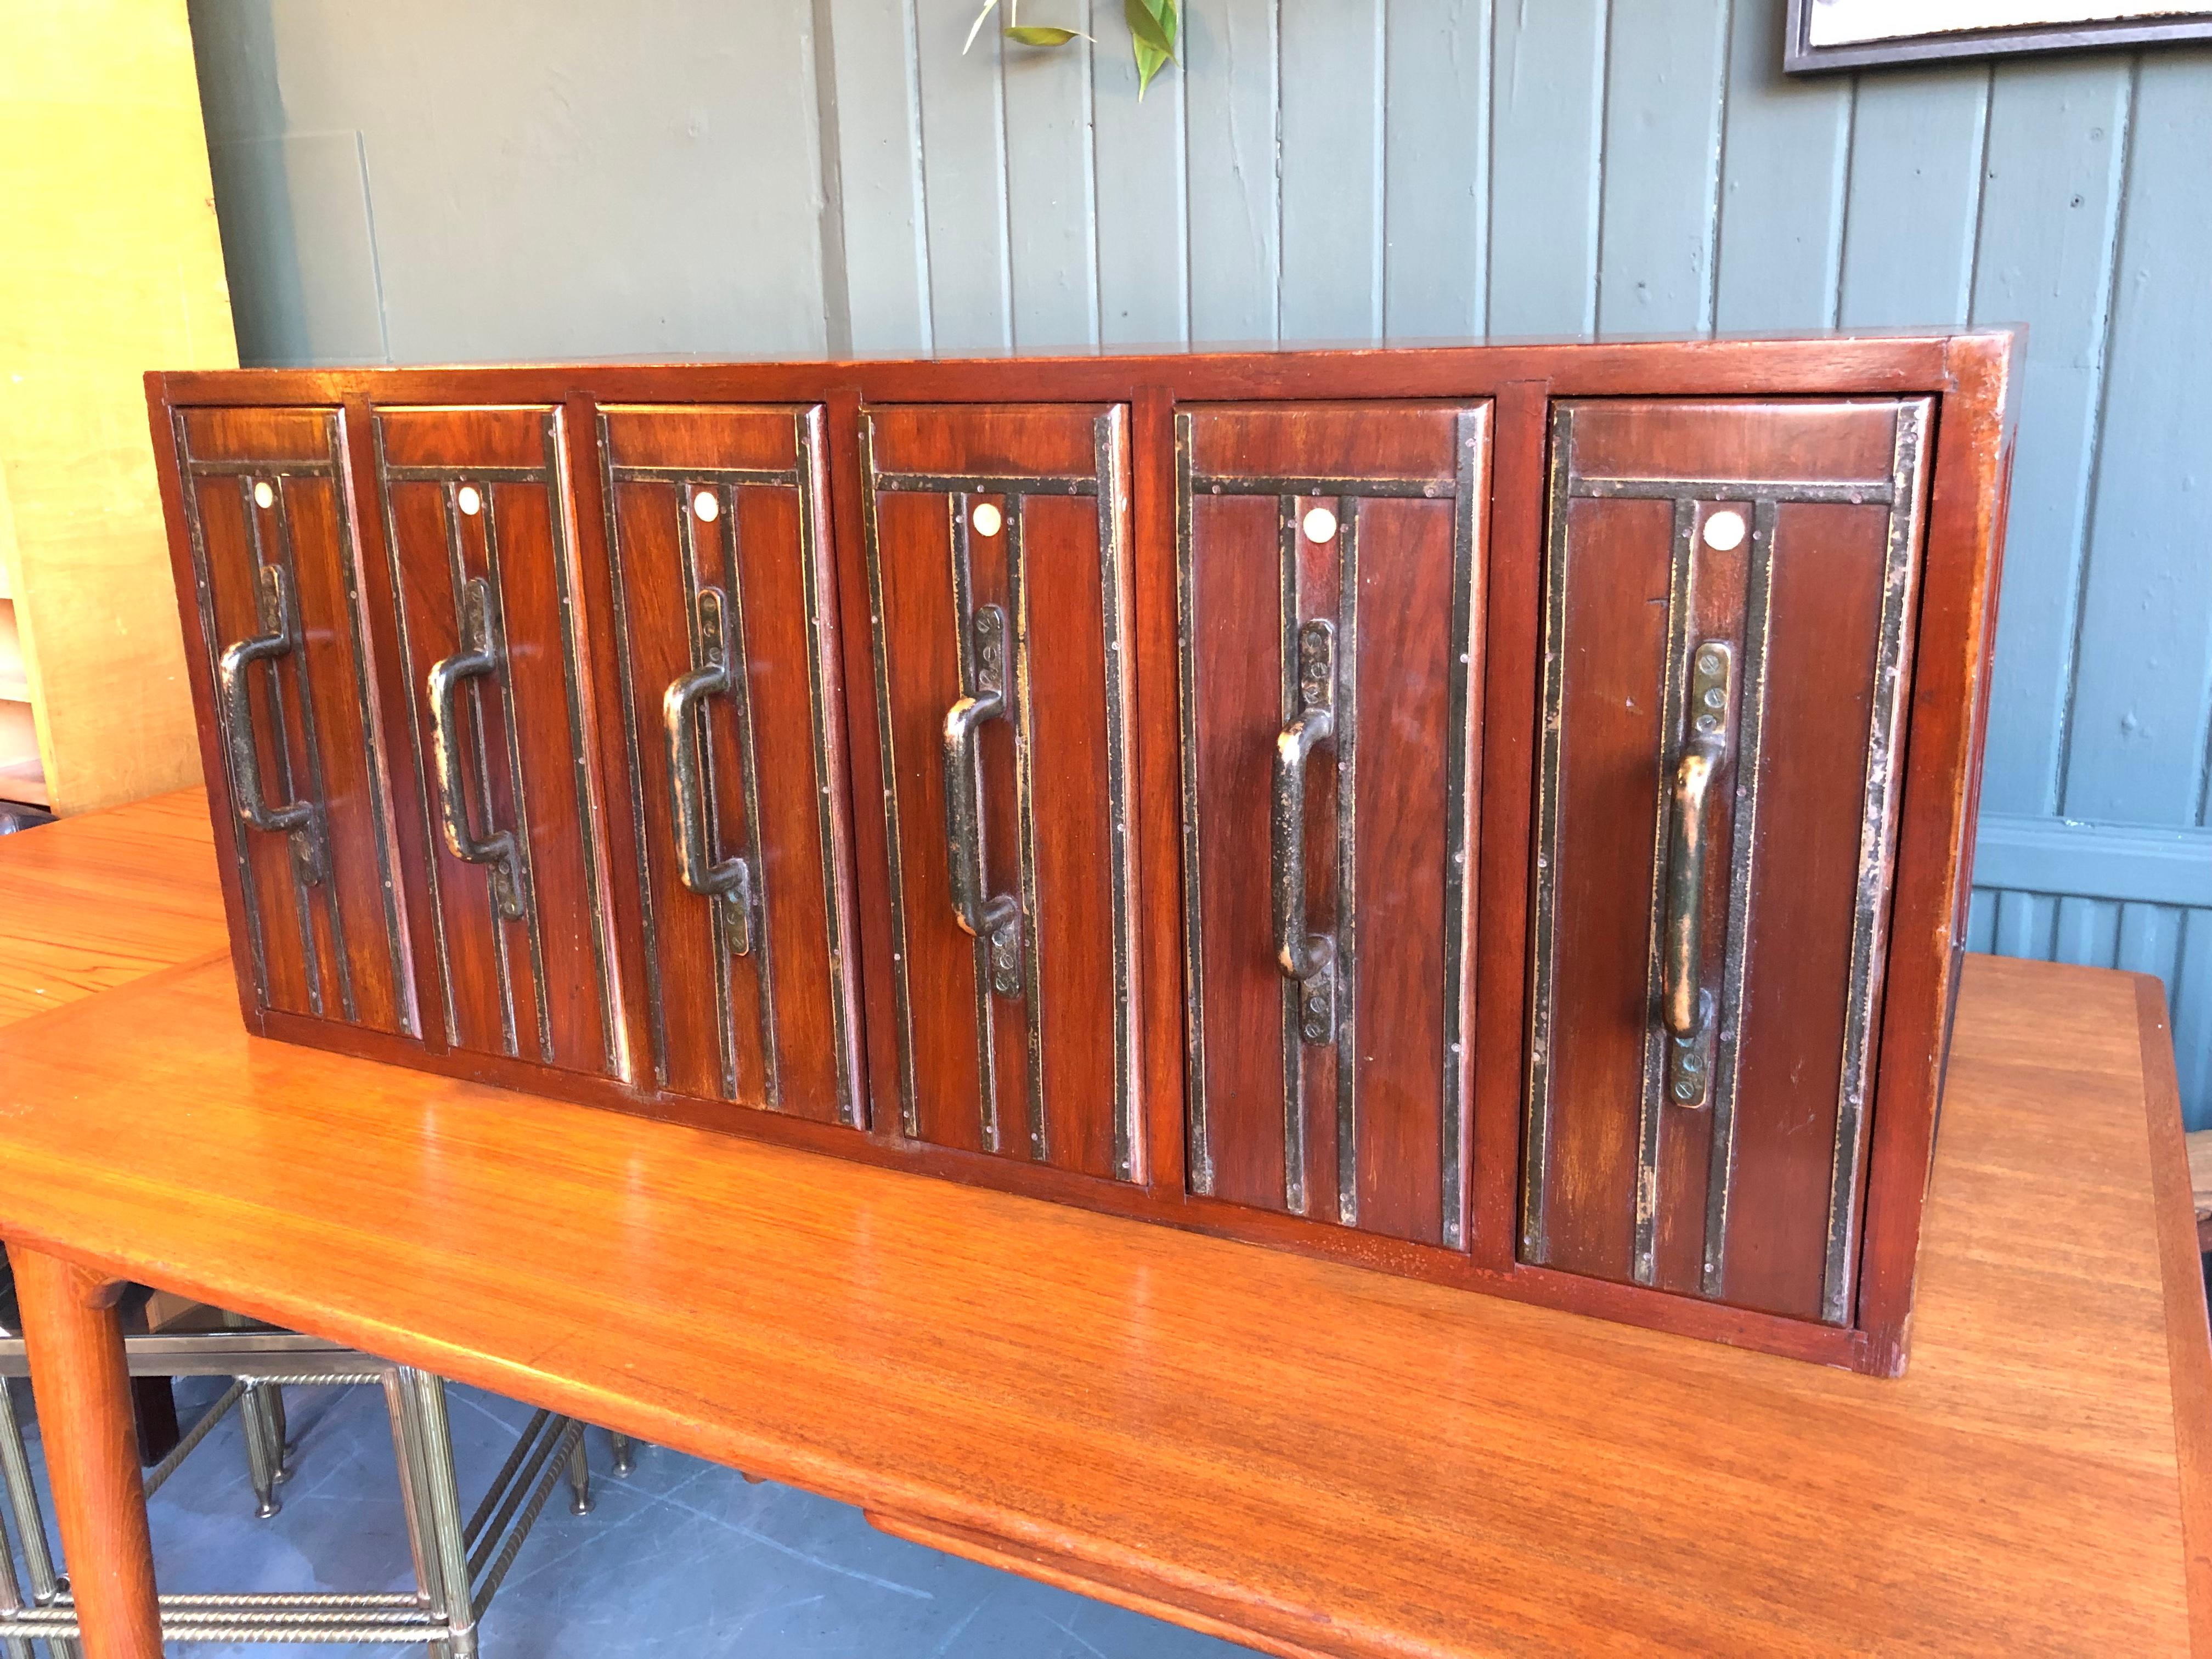 Brass Apothecary Cabinet, Early 20th Century, Vertical Drawers with 113 Glass Bottles